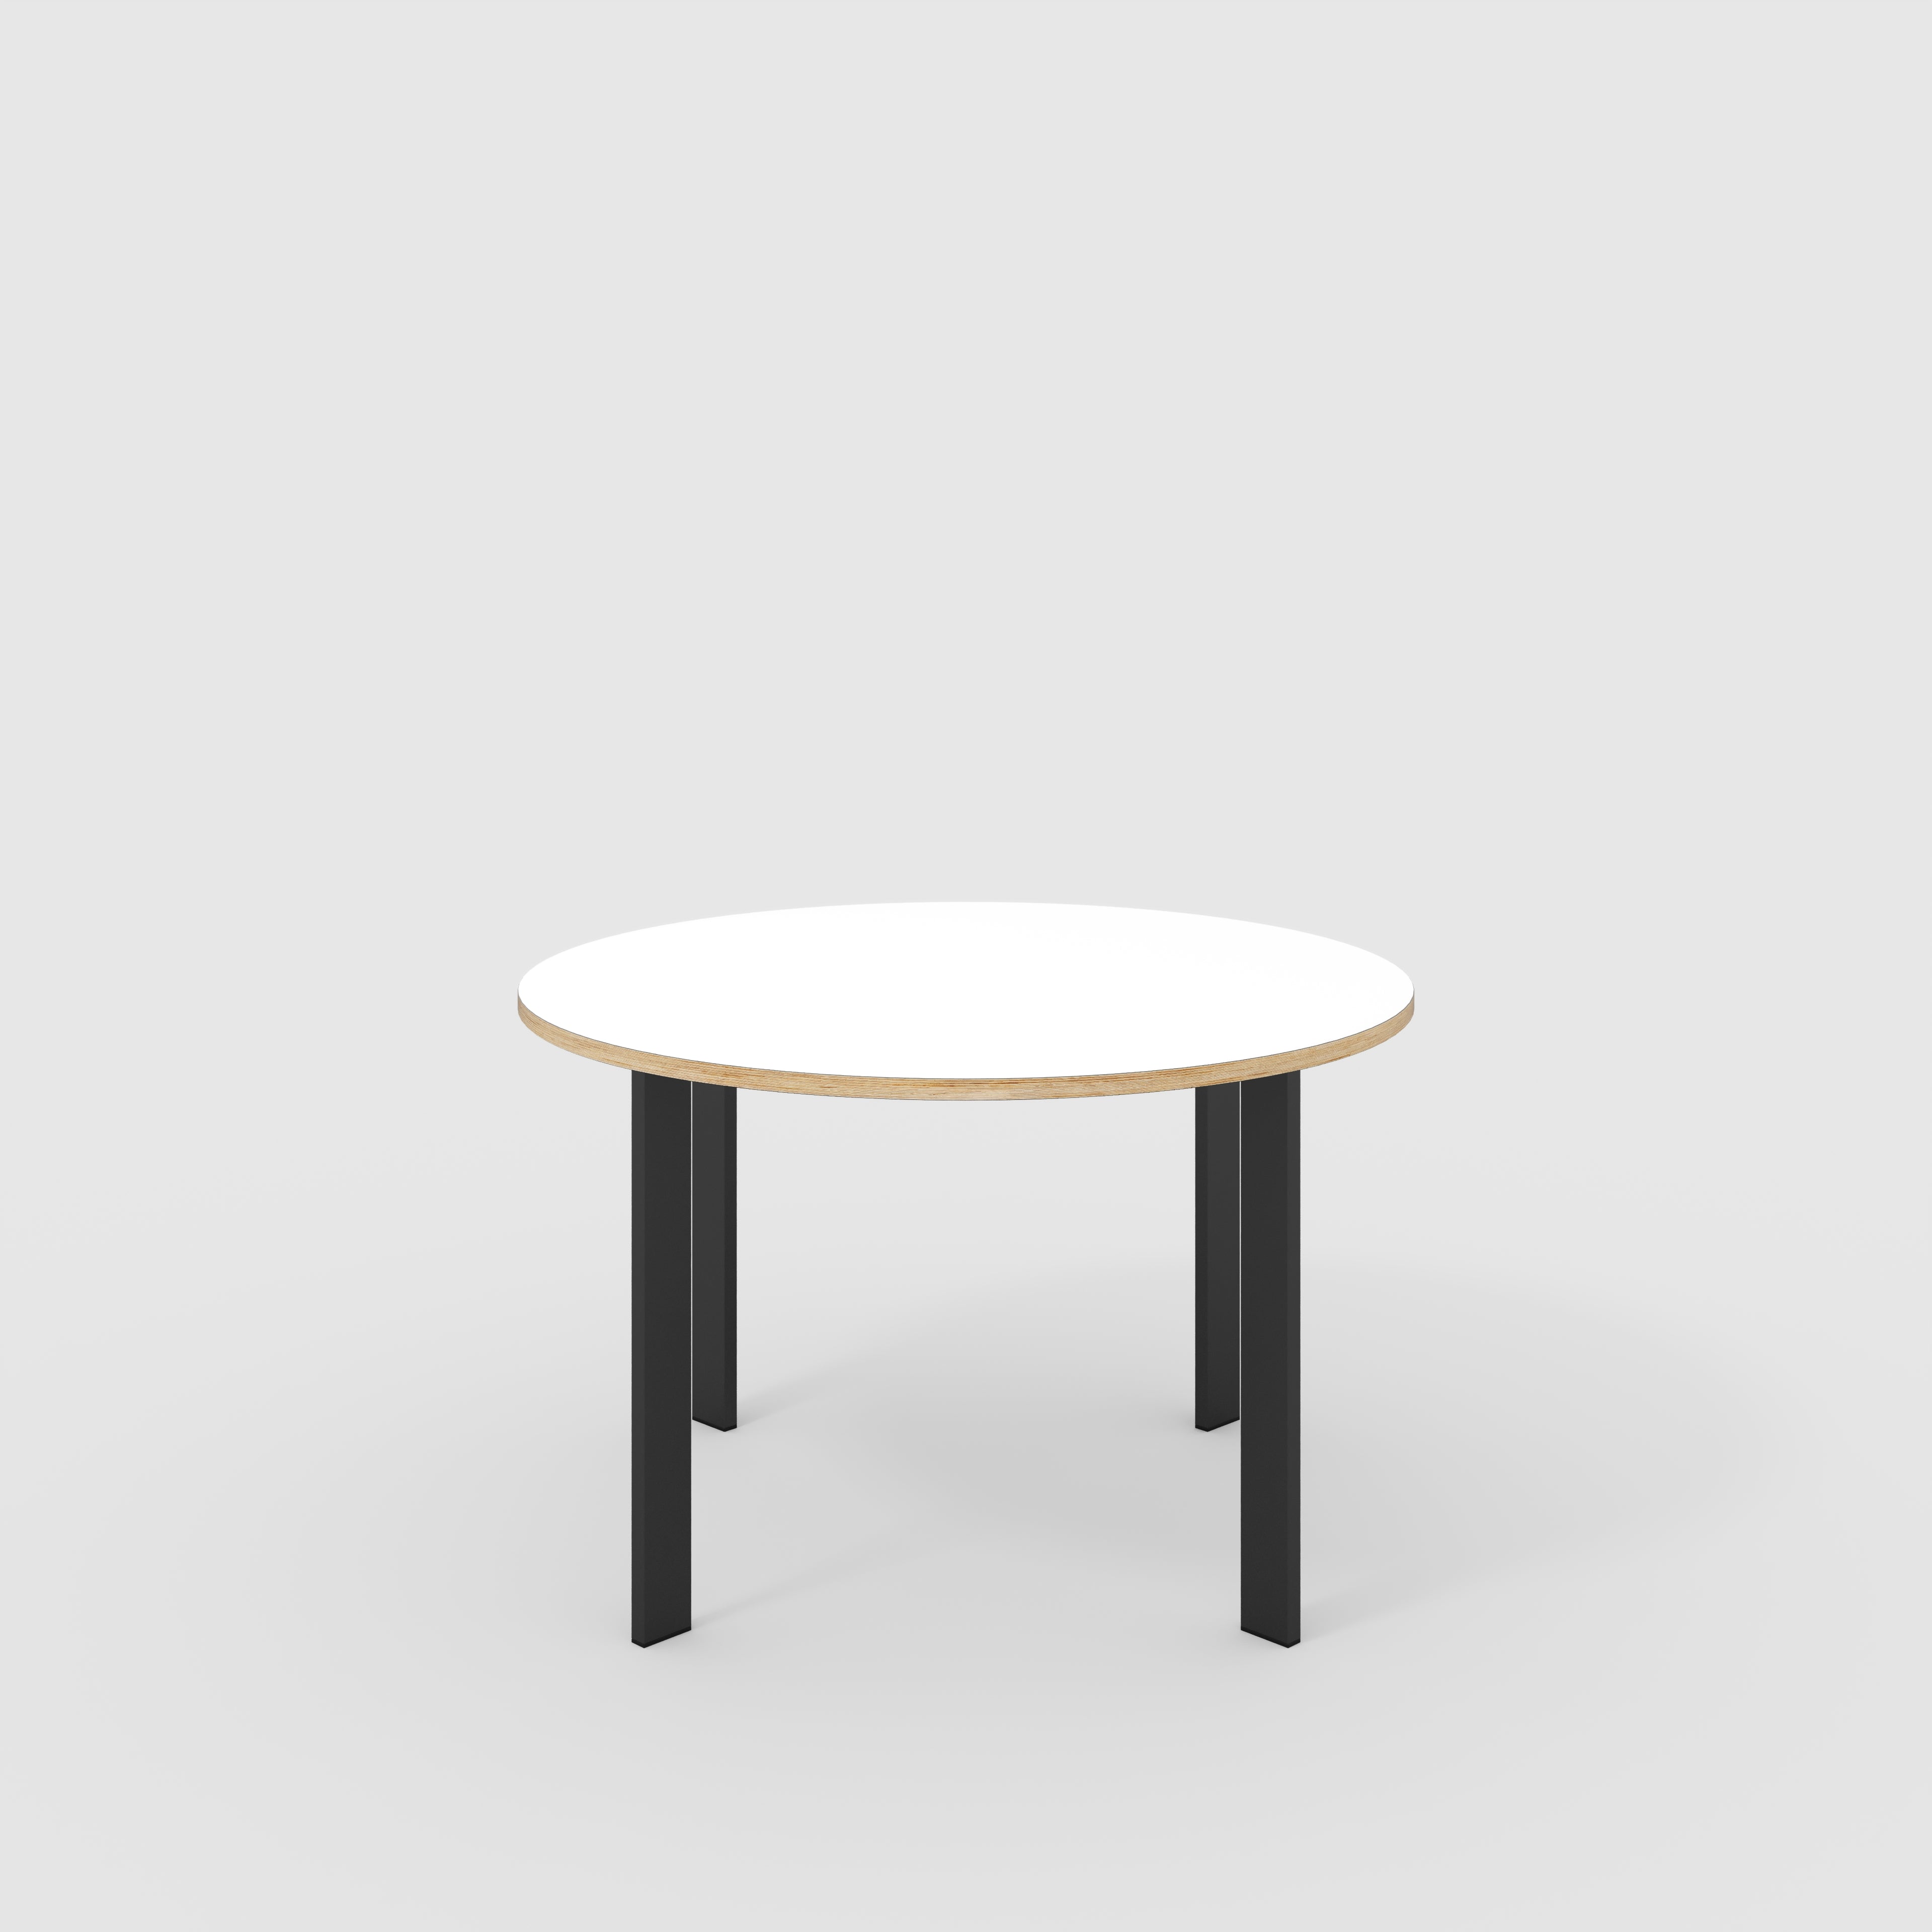 Round Table with Black Rectangular Single Pin Legs - Formica White - 1200(dia) x 735(h)